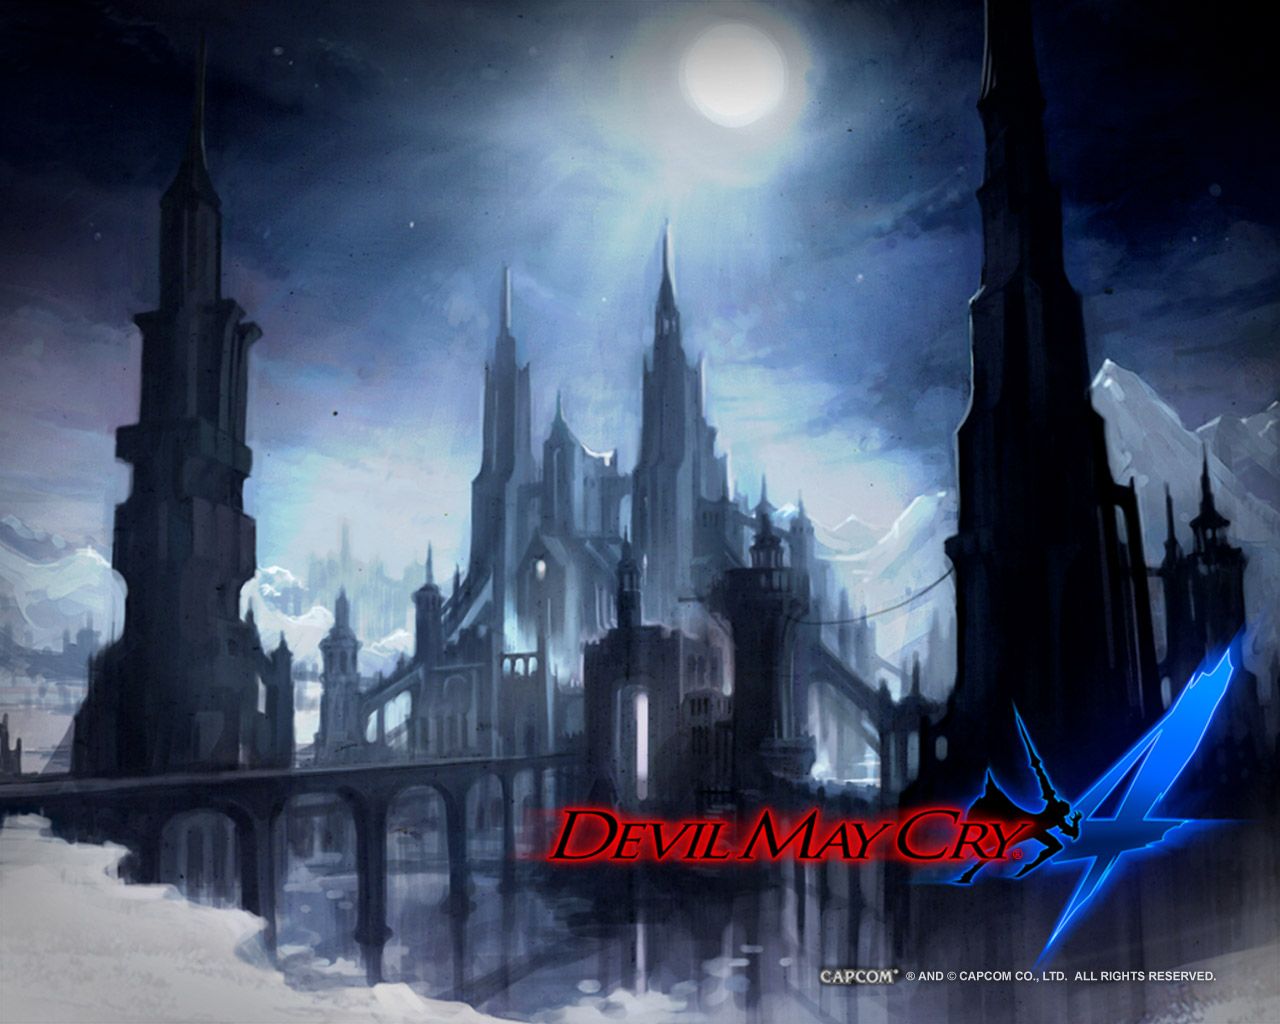 Xbox360 game - Devil may cry 4 wallpapers 1280x1024 NO.6 Desktop